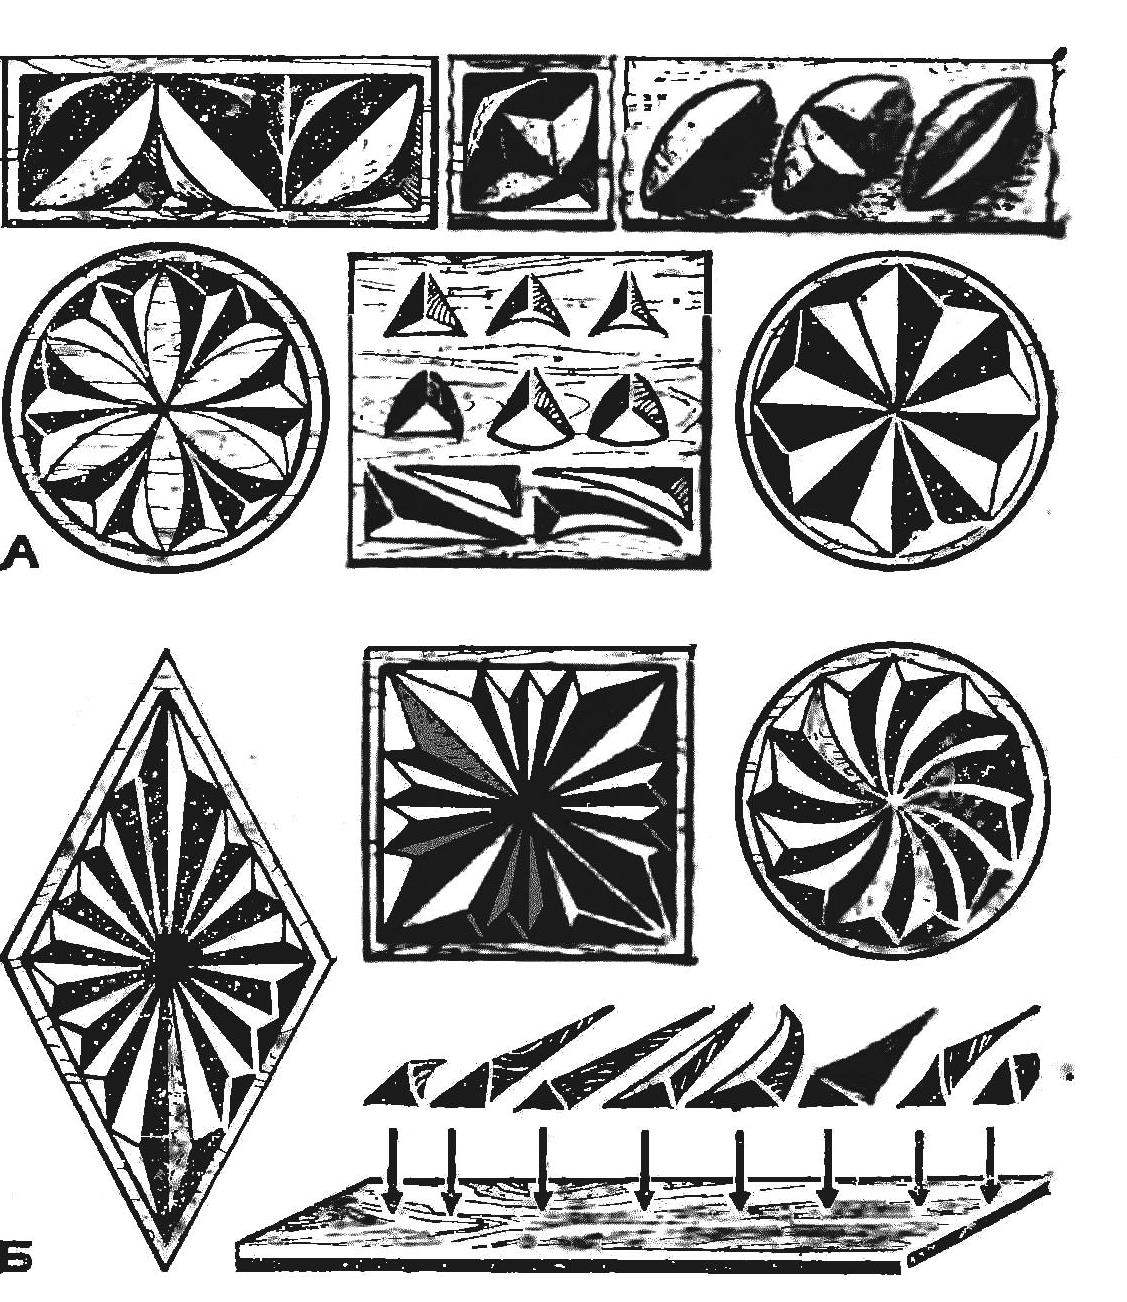 Figure 10. Details of the ornament